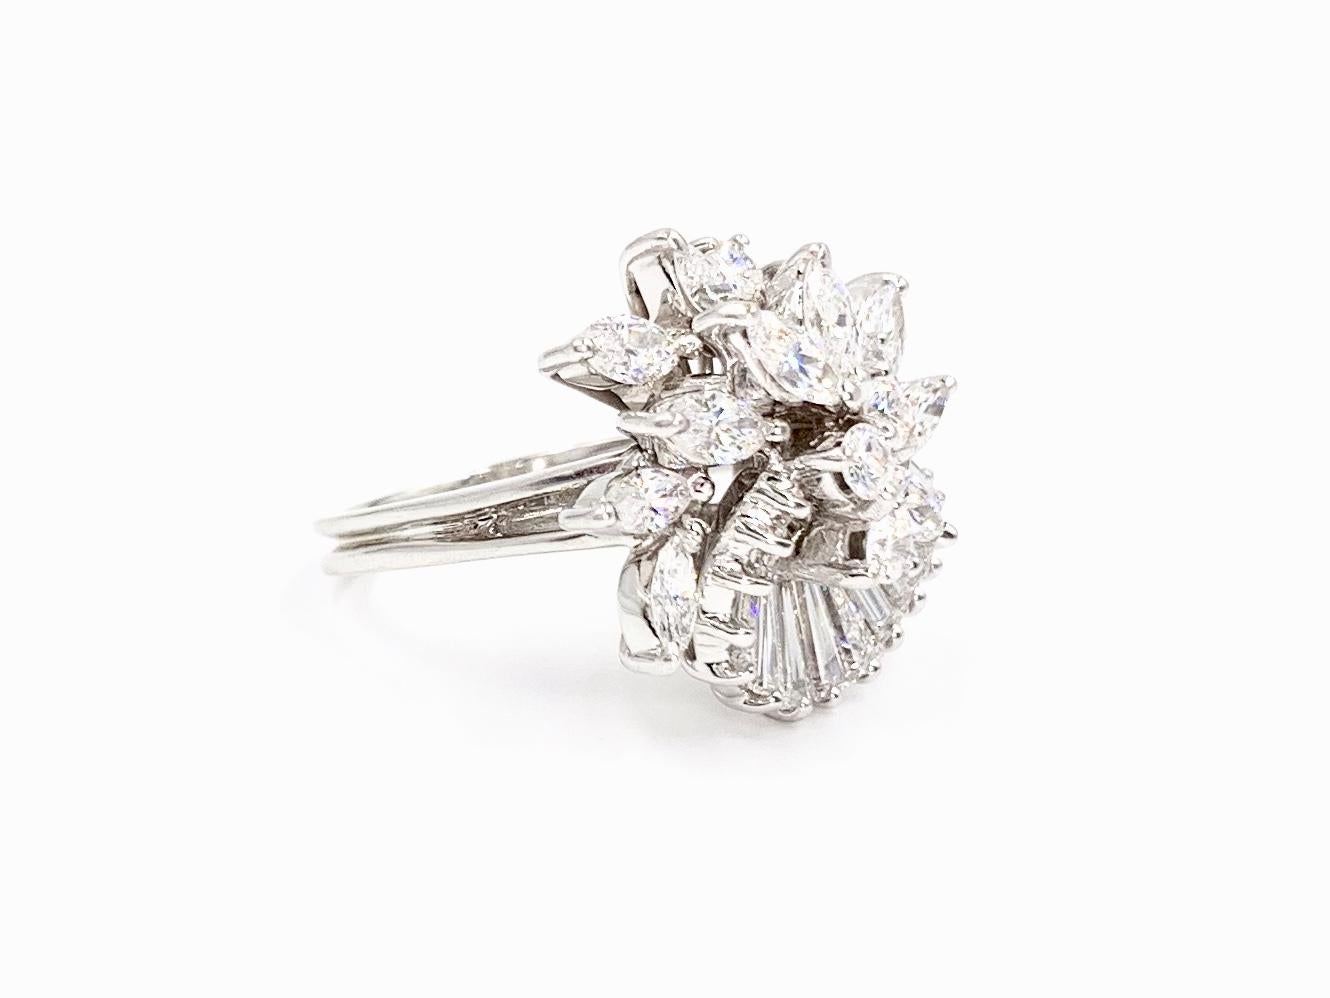 A feminine and dynamic 14 karat white gold round brilliant, marquise and baguette cut diamond spray ring. Unique ring has a soft curvy shape, reminiscent of a flower with the marquise diamonds as petals. Ring consists of 15 baguettes, 10 marquise